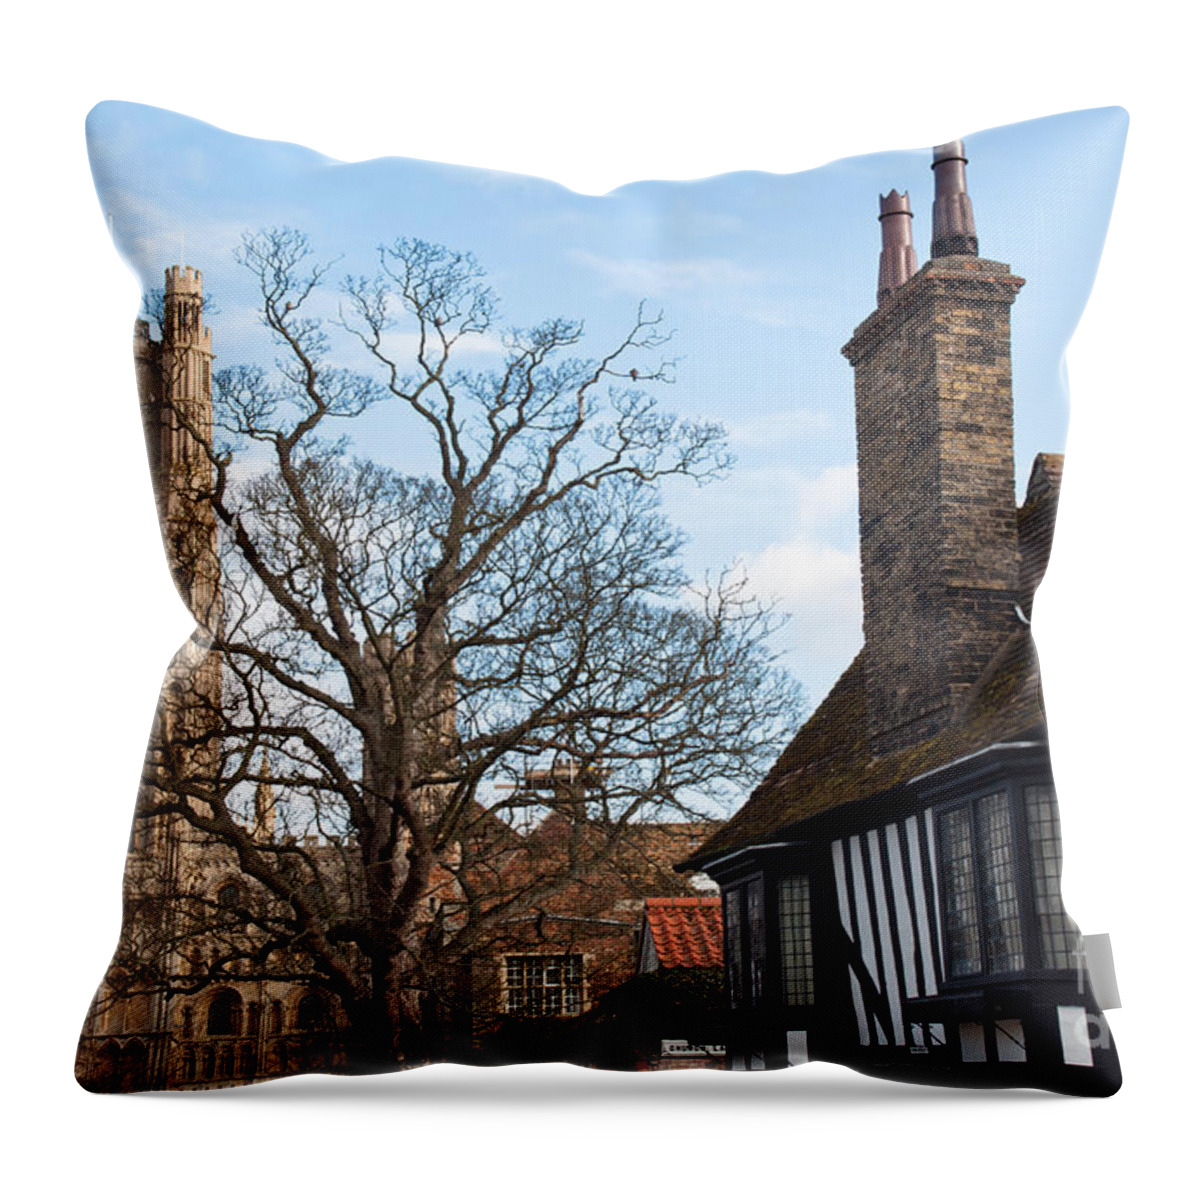 Anglia Throw Pillow featuring the photograph Old English House by Andrew Michael